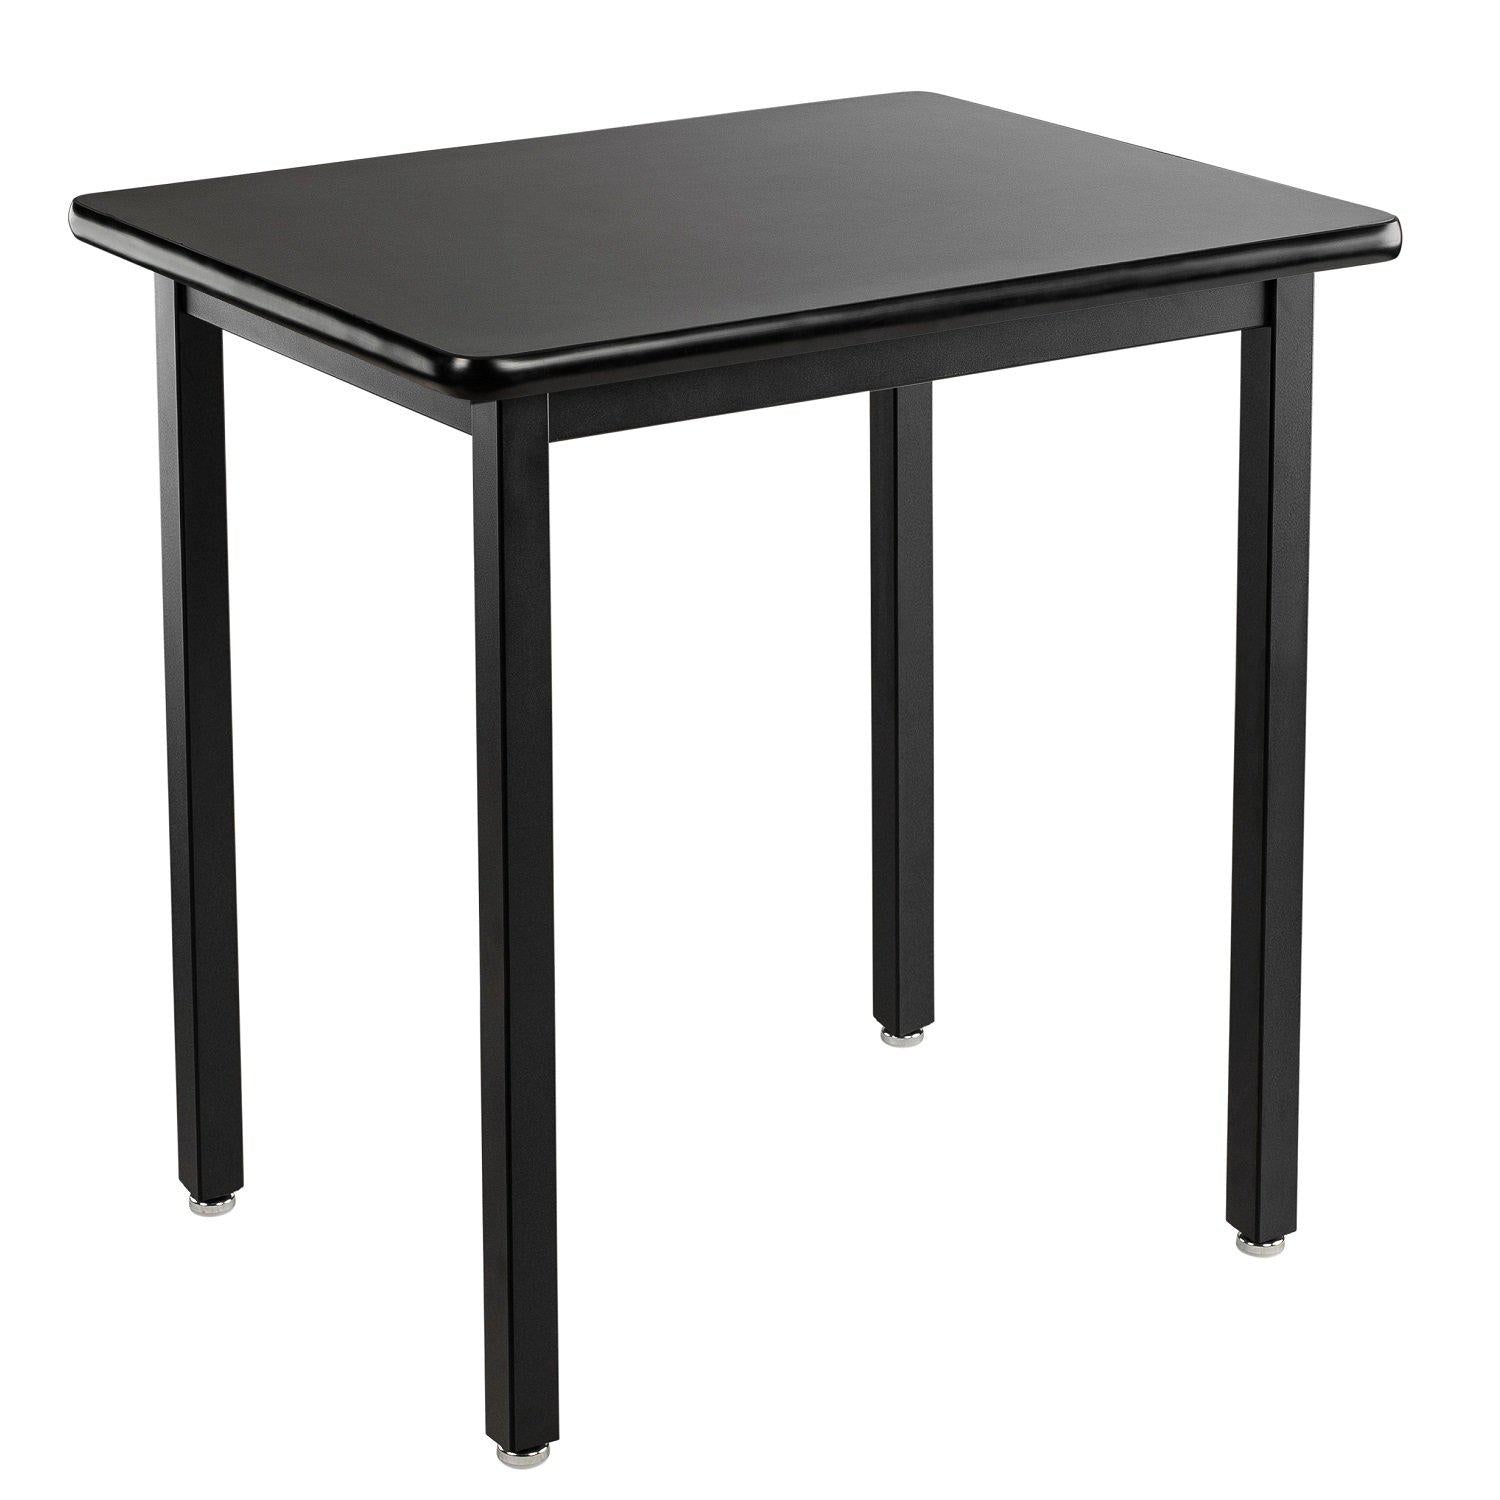 Heavy-Duty Fixed Height Utility Table, Black Frame, 30" x 36", High-Pressure Laminate Top with T-Mold Edge